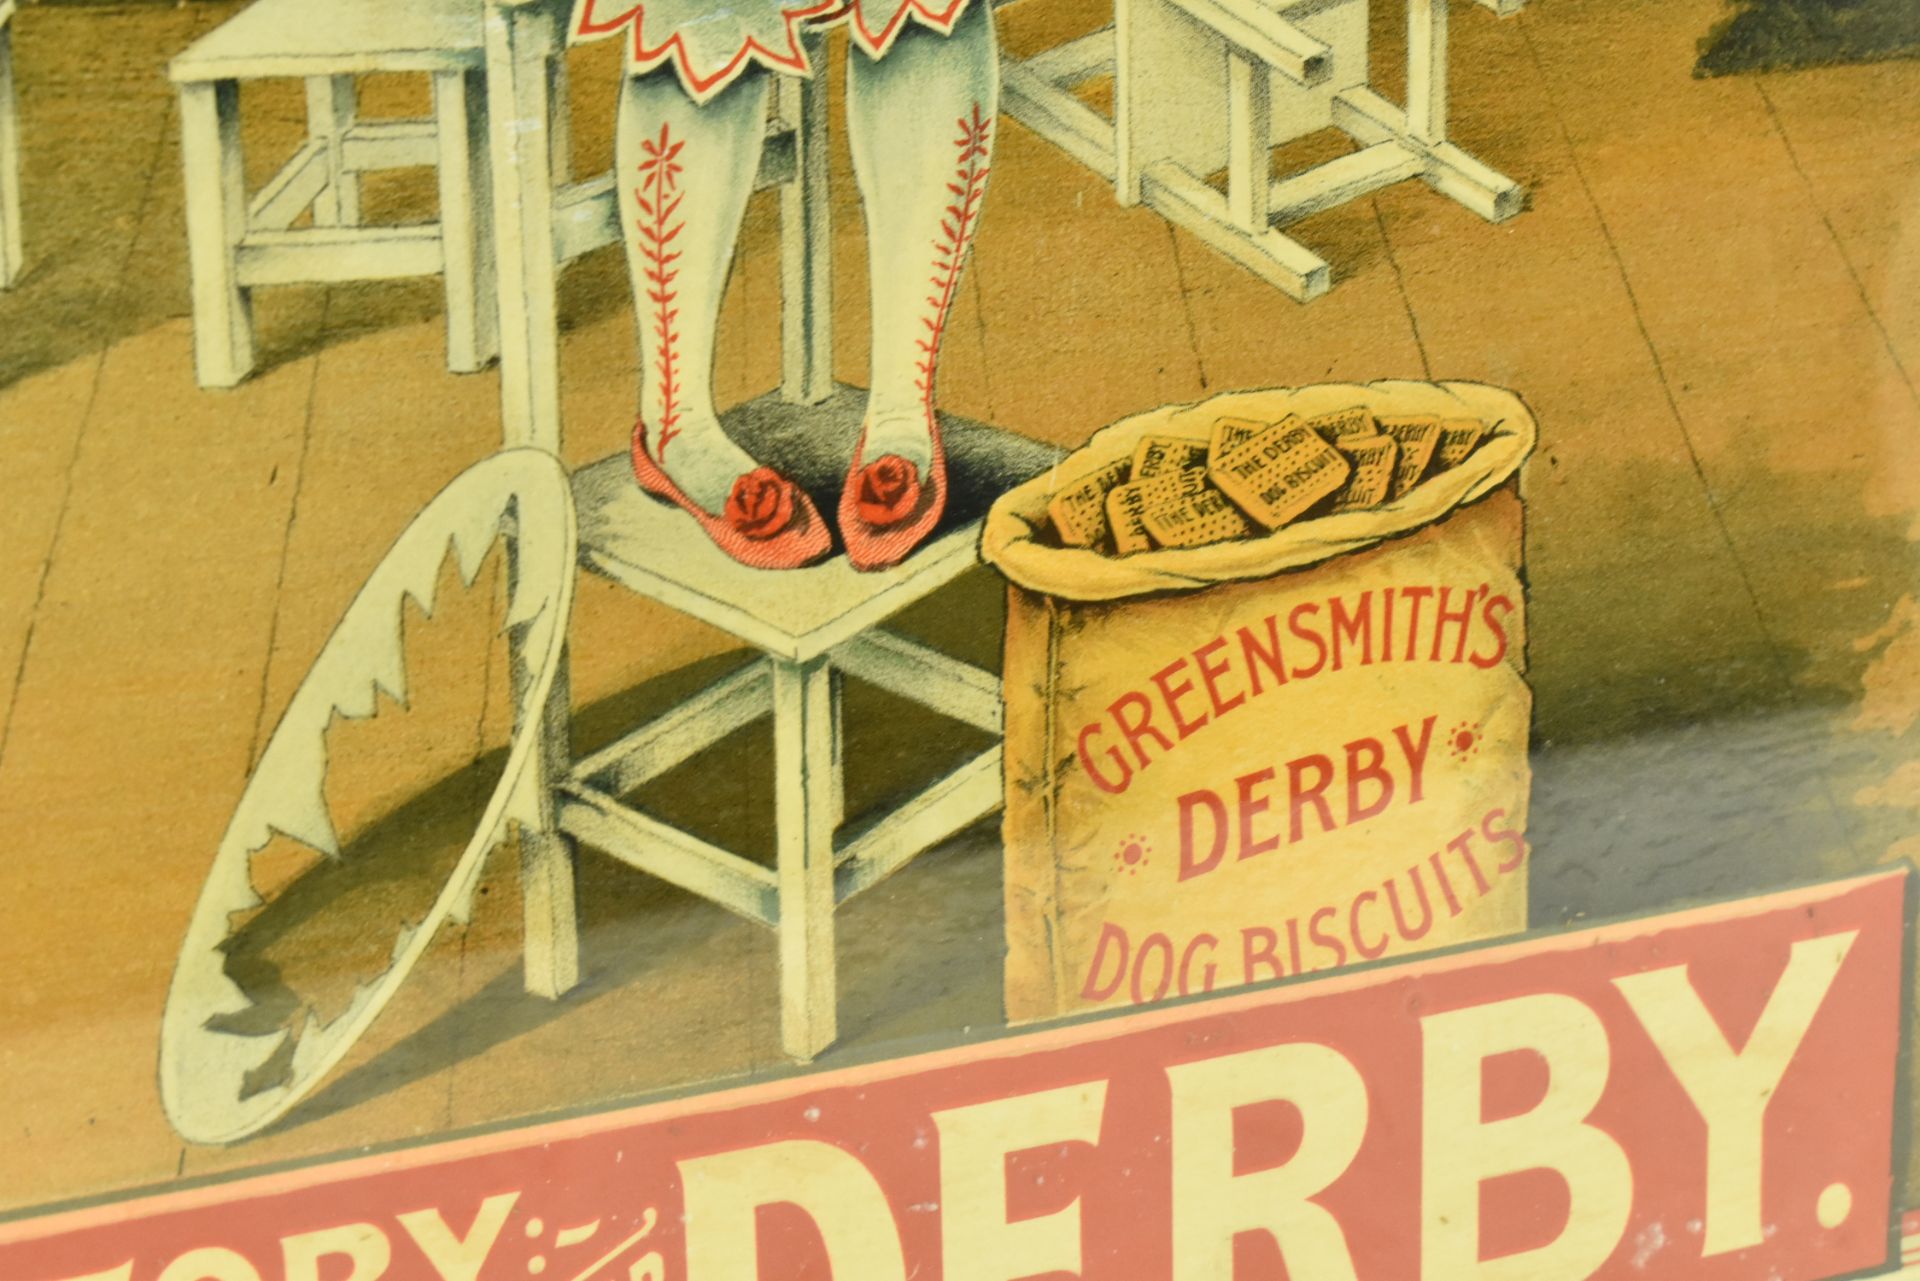 VINTAGE ADVERTISING - GREENSMITH'S DERBY DOG BISCUITS CARD - Image 5 of 7